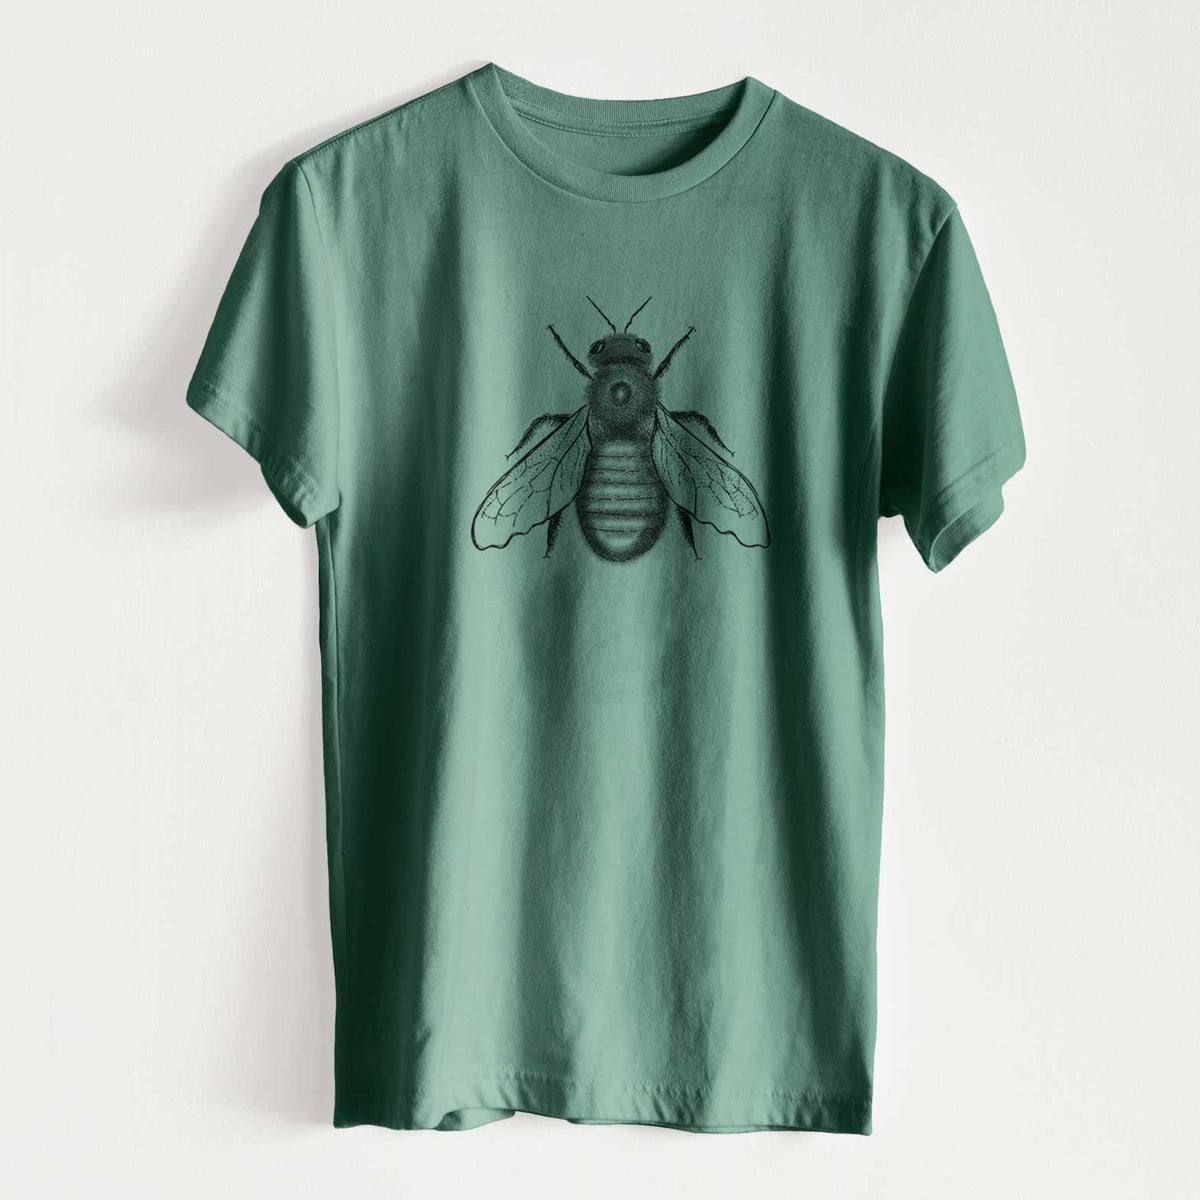 Xylocopa Virginica - Carpenter Bee - Unisex Recycled Eco Tee  - CLOSEOUT - FINAL SALE